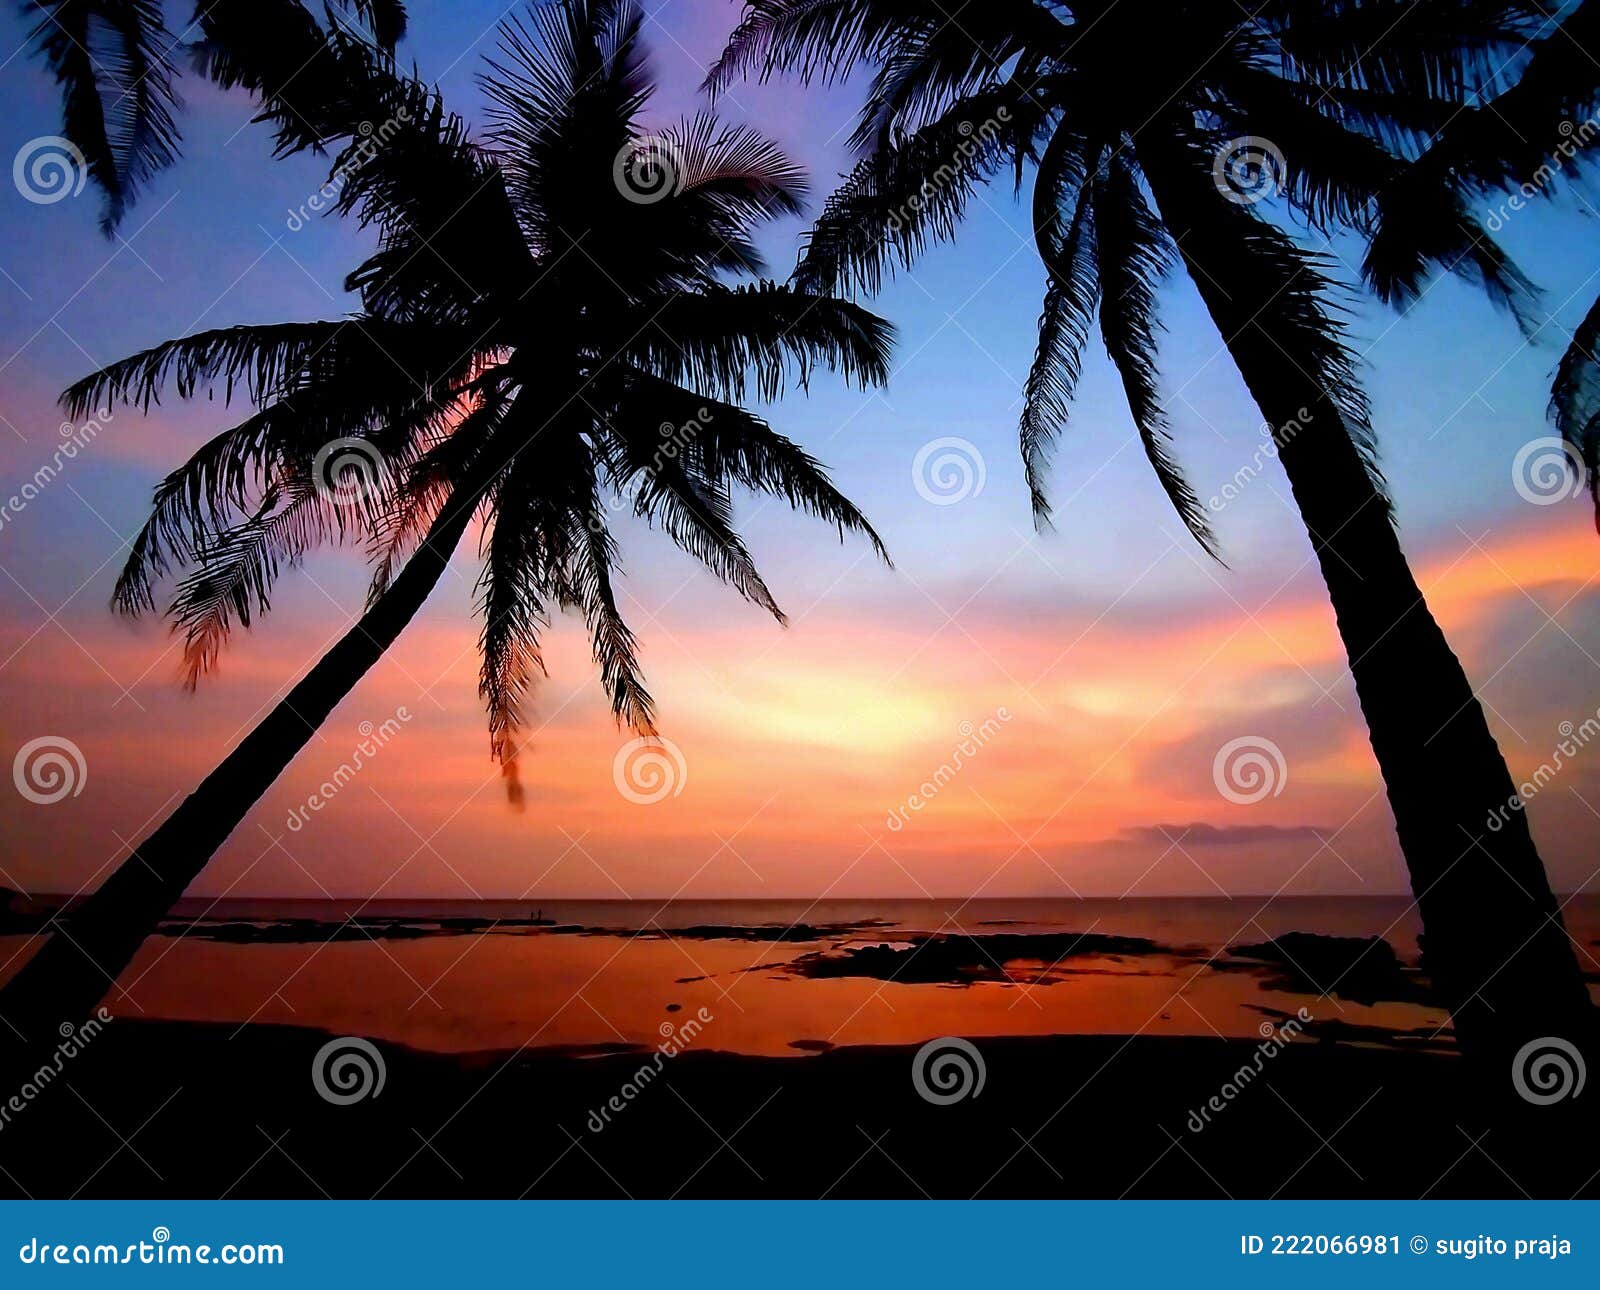 12 067 West Java Photos Free Royalty Free Stock Photos From Dreamstime